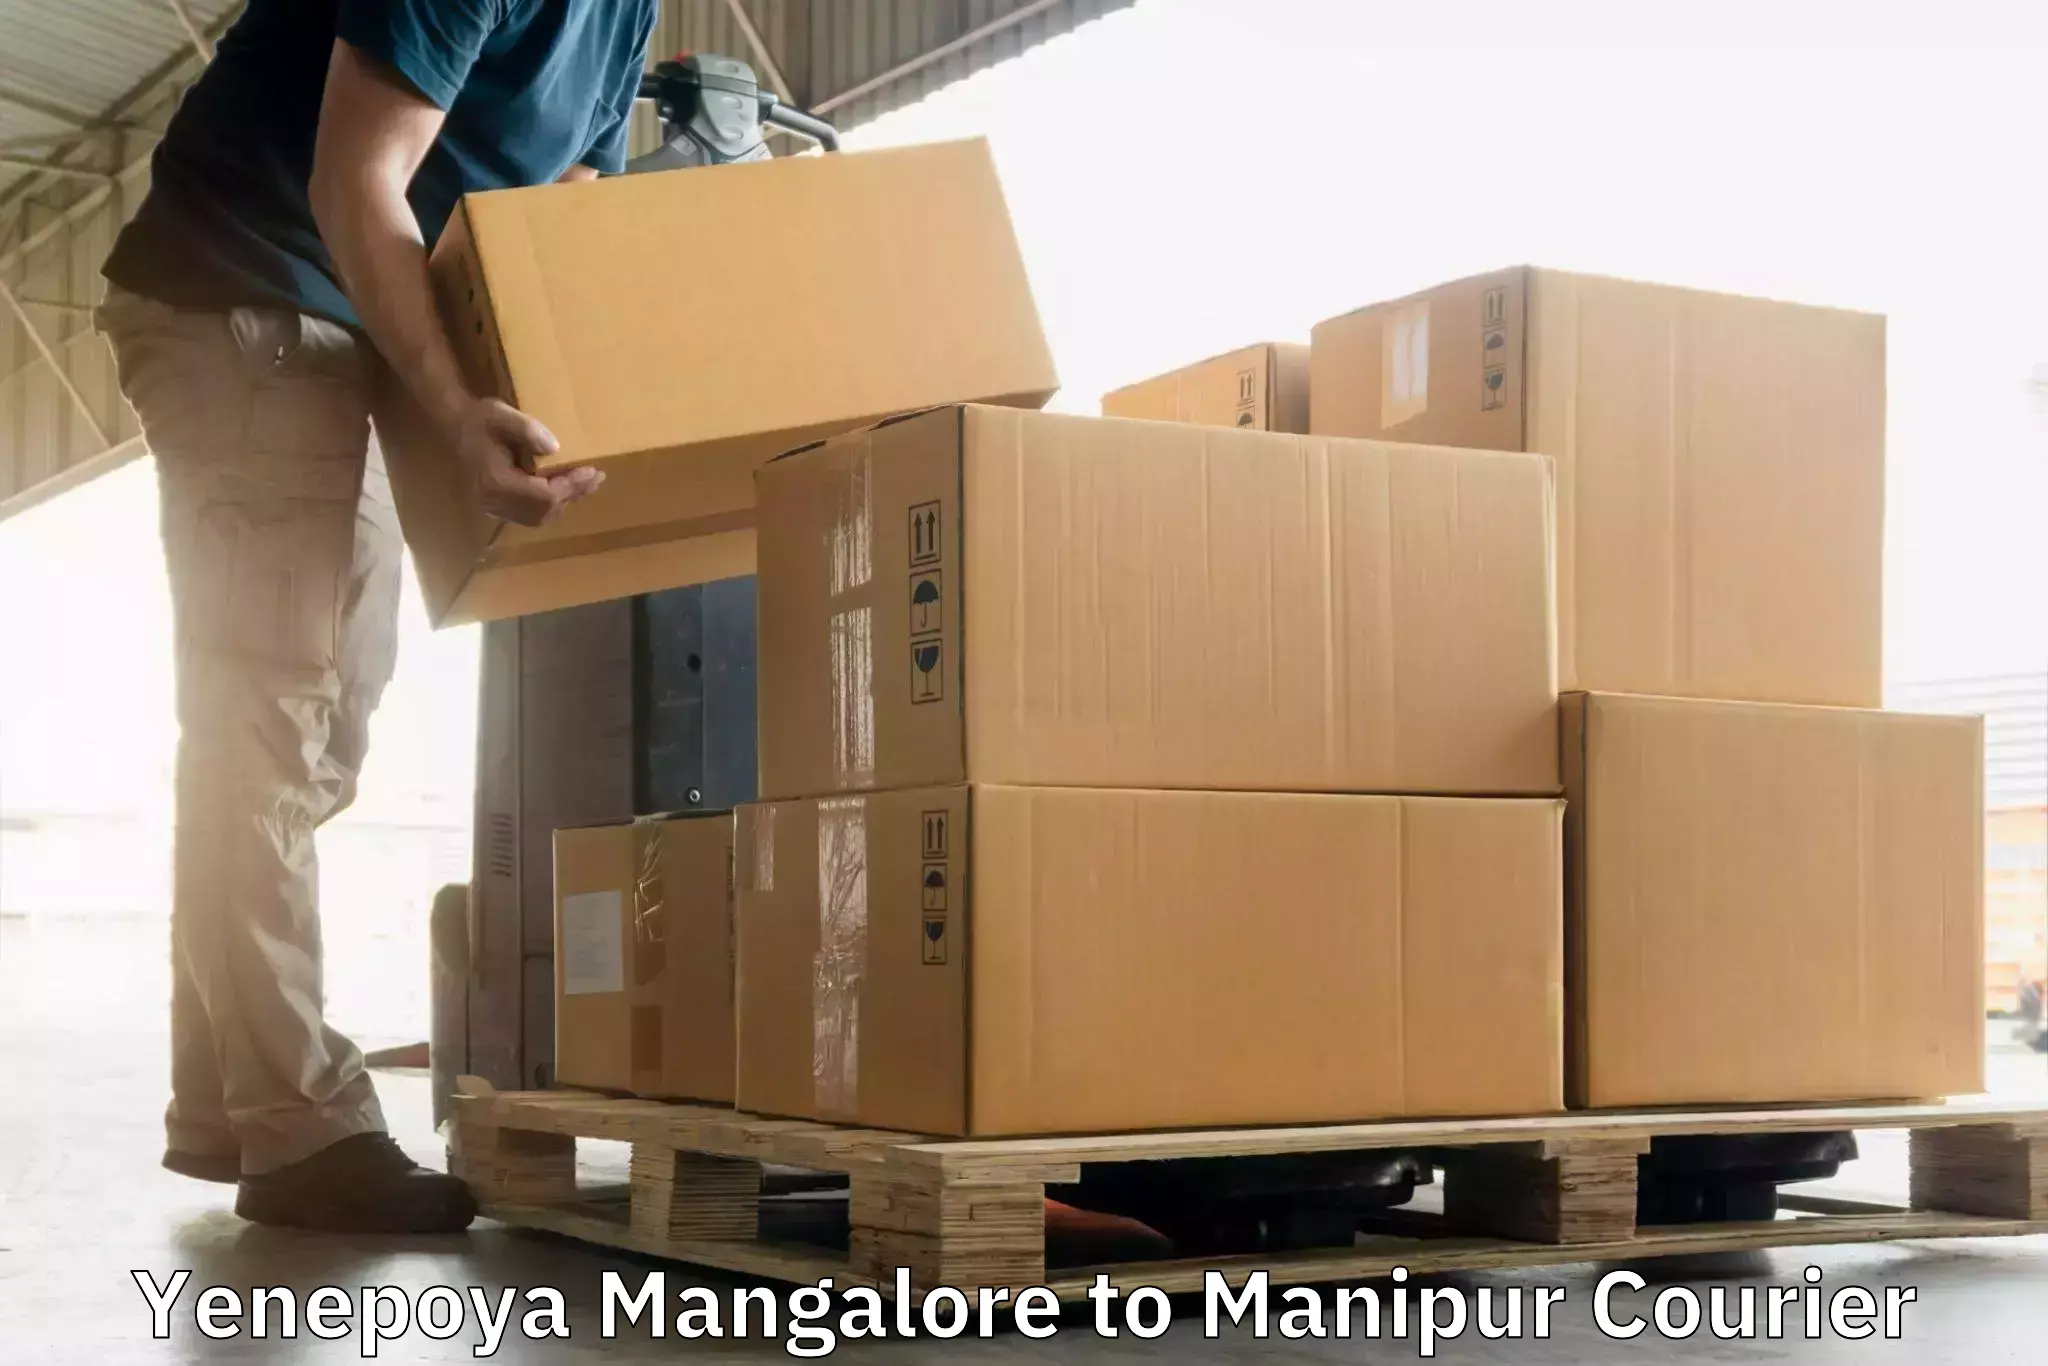 On-call courier service Yenepoya Mangalore to Manipur